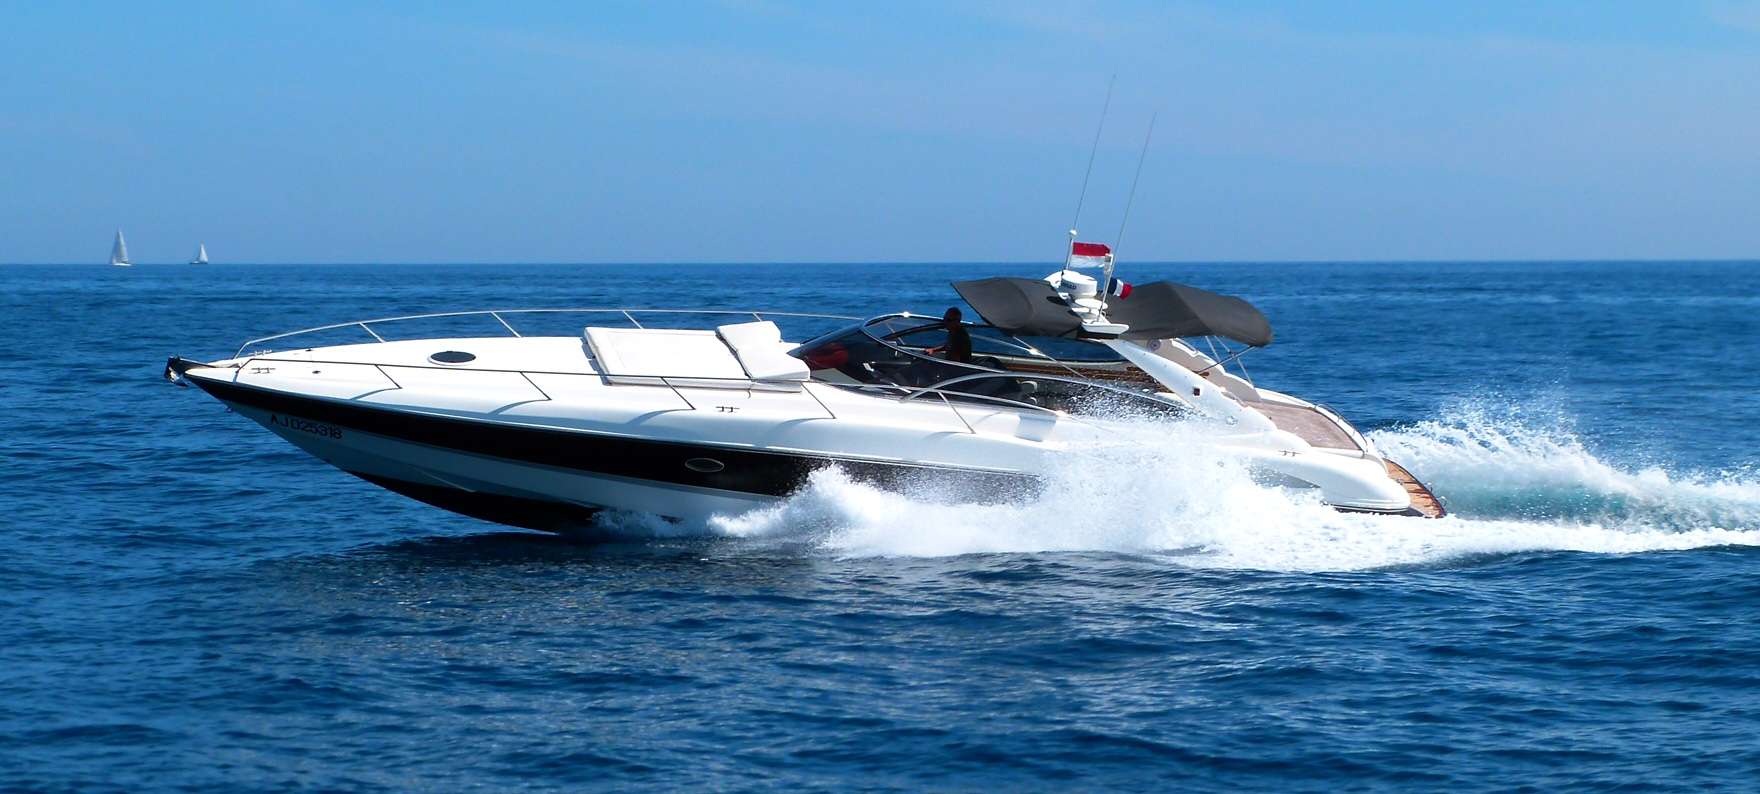 Sunseeker 48 - Luxury yacht charter France & Boat hire in France French Riviera Cannes Vieux port de Vallauris 2